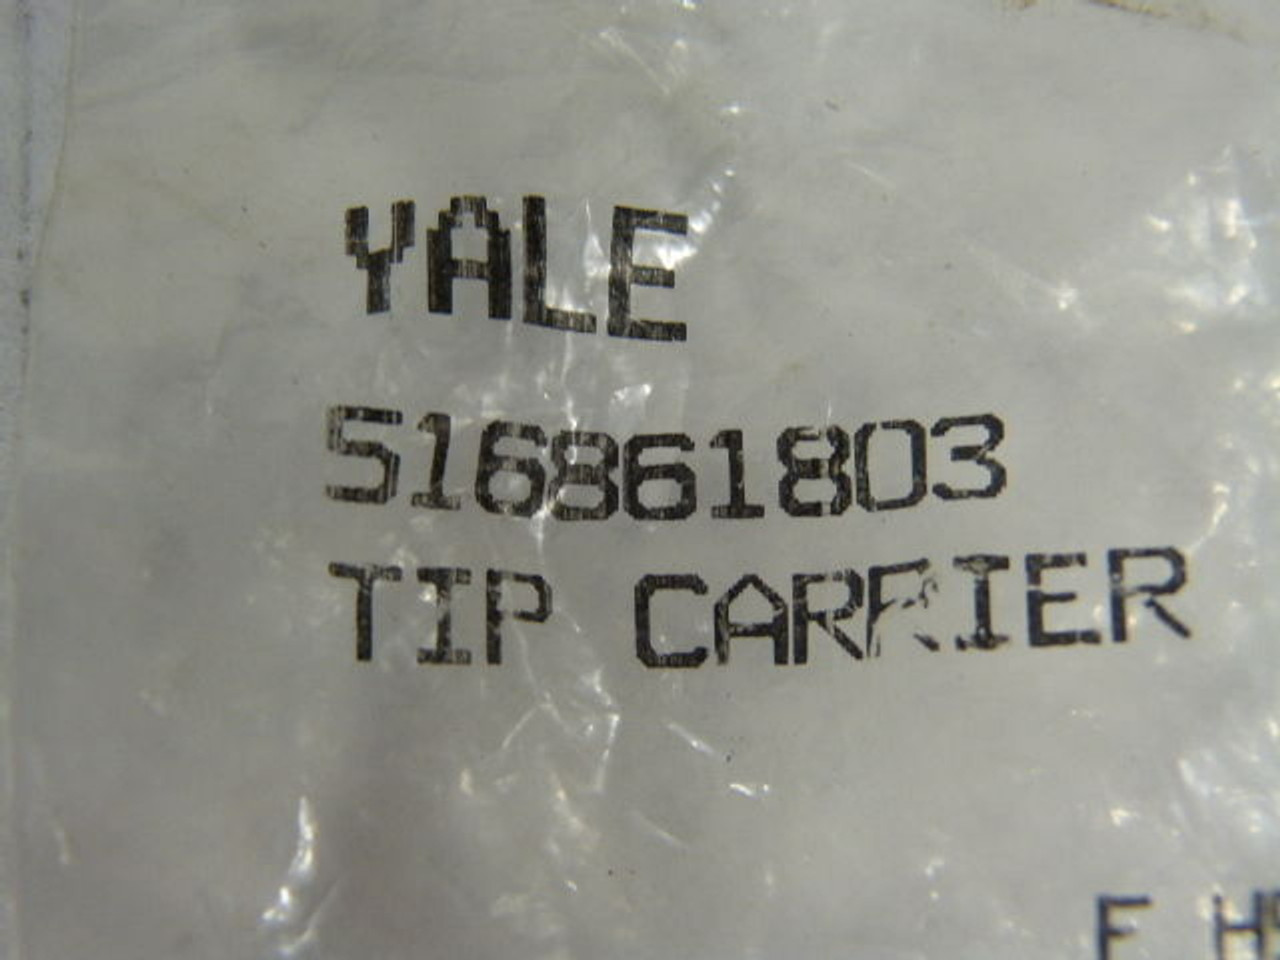 Yale 516861803 Carrier Tip ! NEW !